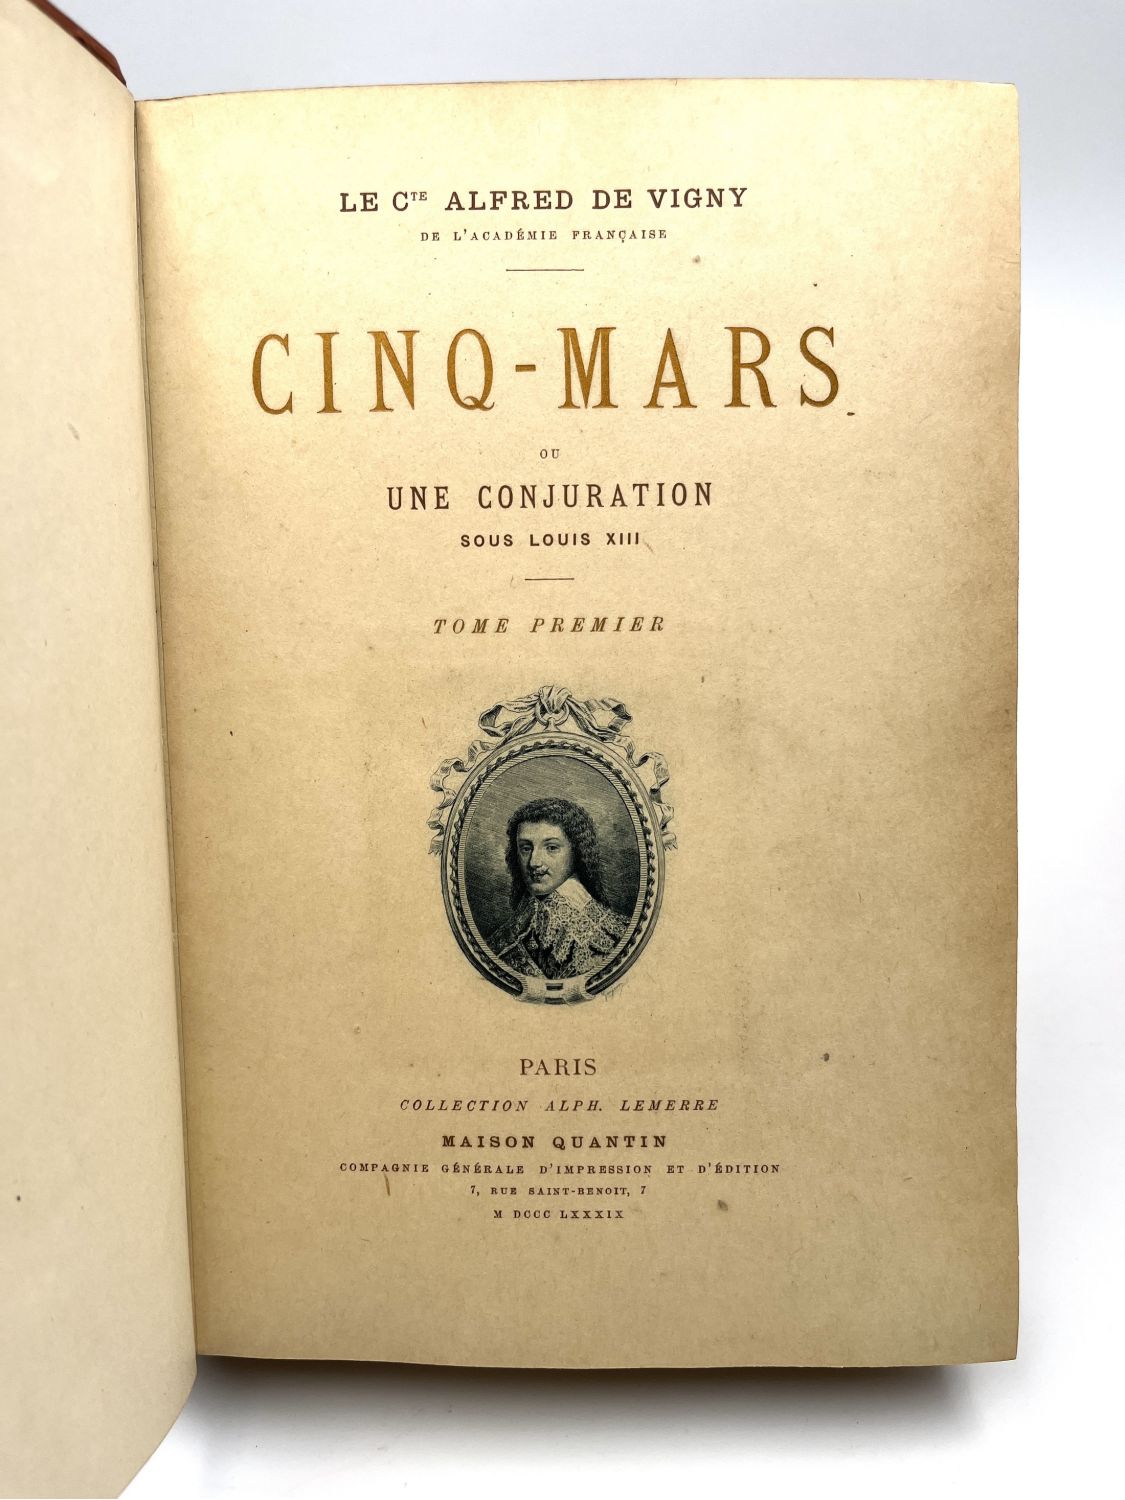 Cinq-Mars, ou une conjuration sous Louis XIII. by VIGNY Alfred de -  Paperback - 1913 - from Librairie & Cætera (SKU: 131896)